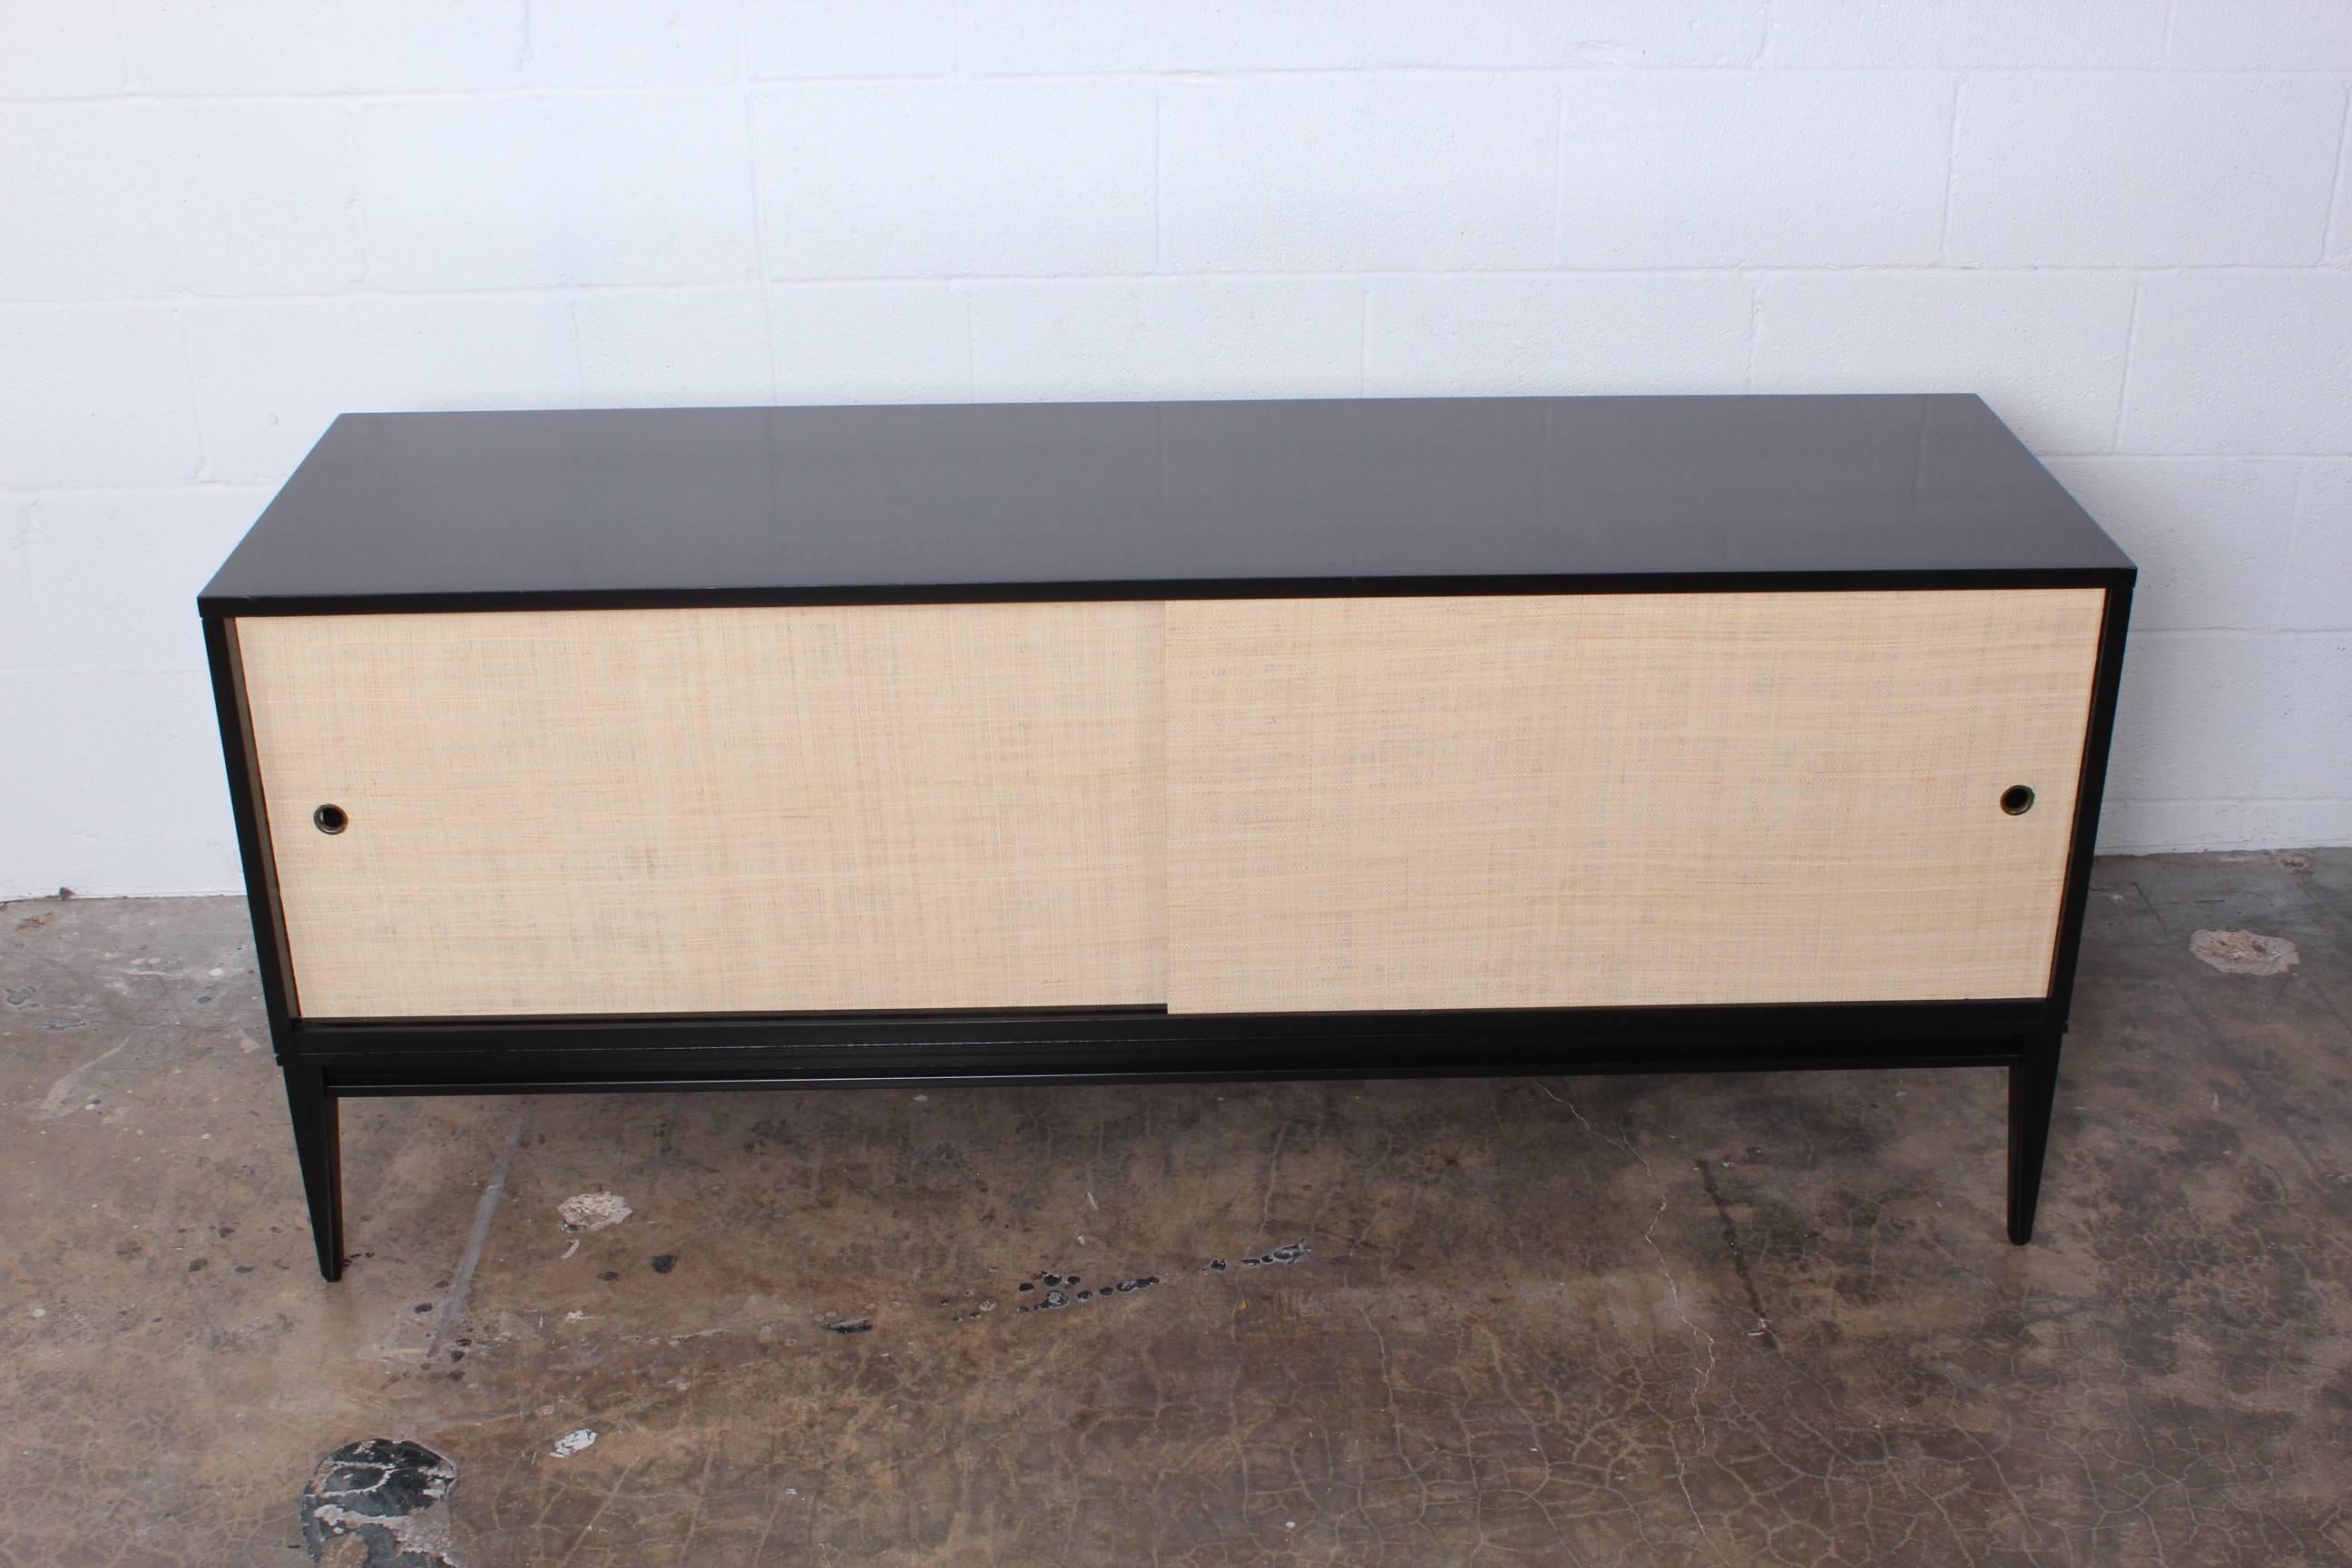 A black lacquered credenza with grasscloth doors and adjustable shelves. Designed by Paul McCobb for Winchendon.